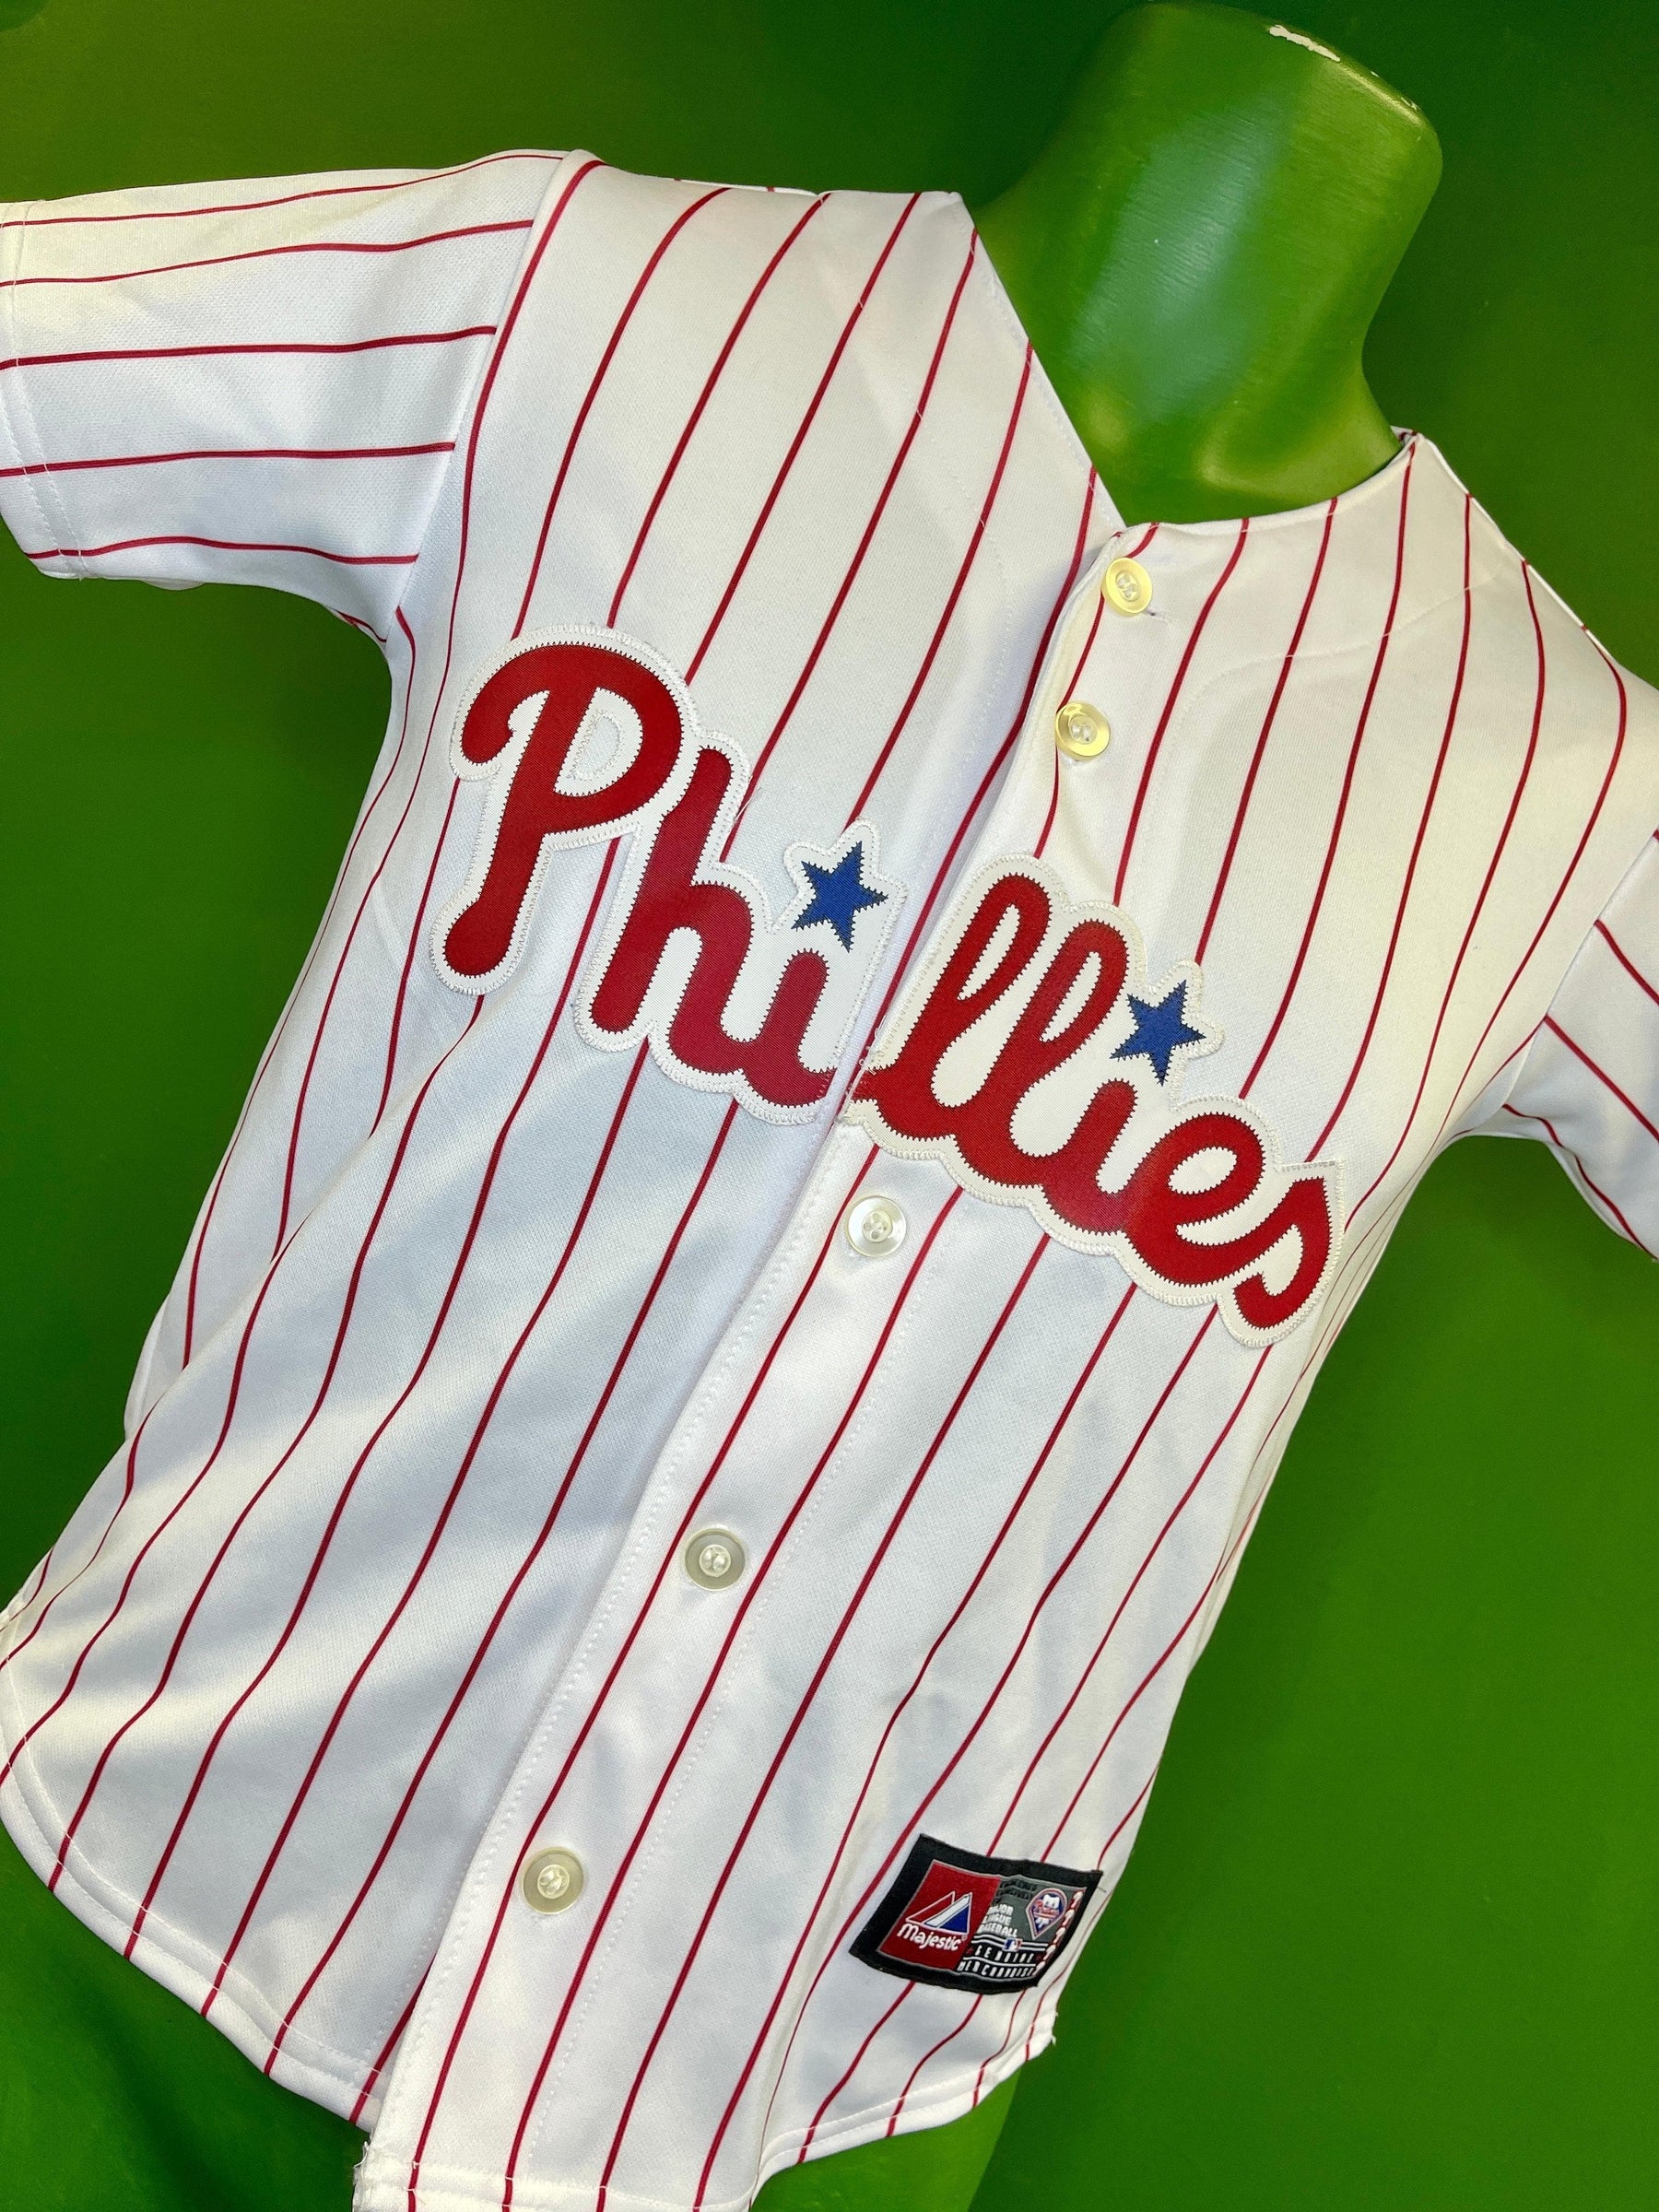 youth chase utley jersey